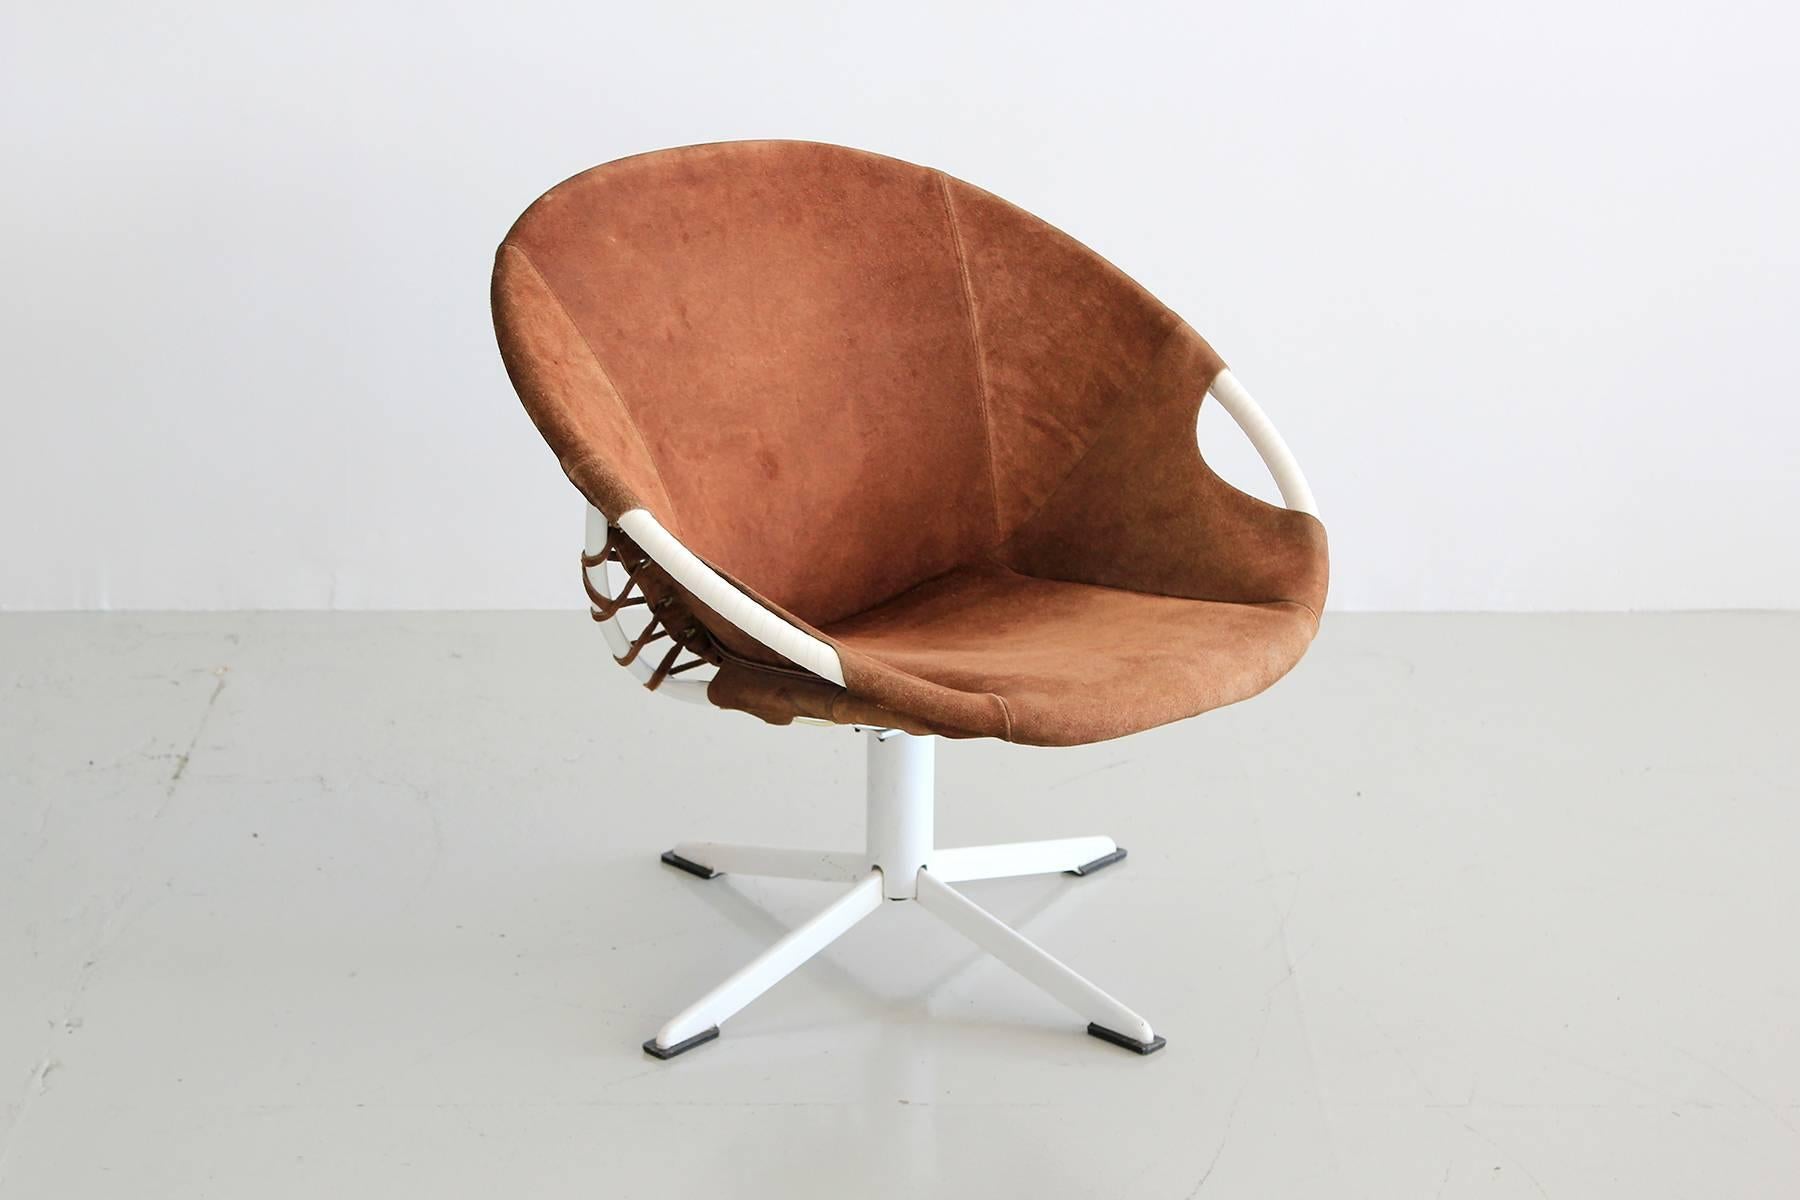 Unique pair of Austrian swivel chair with scoop chairs with chocolate brown suede seat, white iron swivel base and whip stitch detailing.